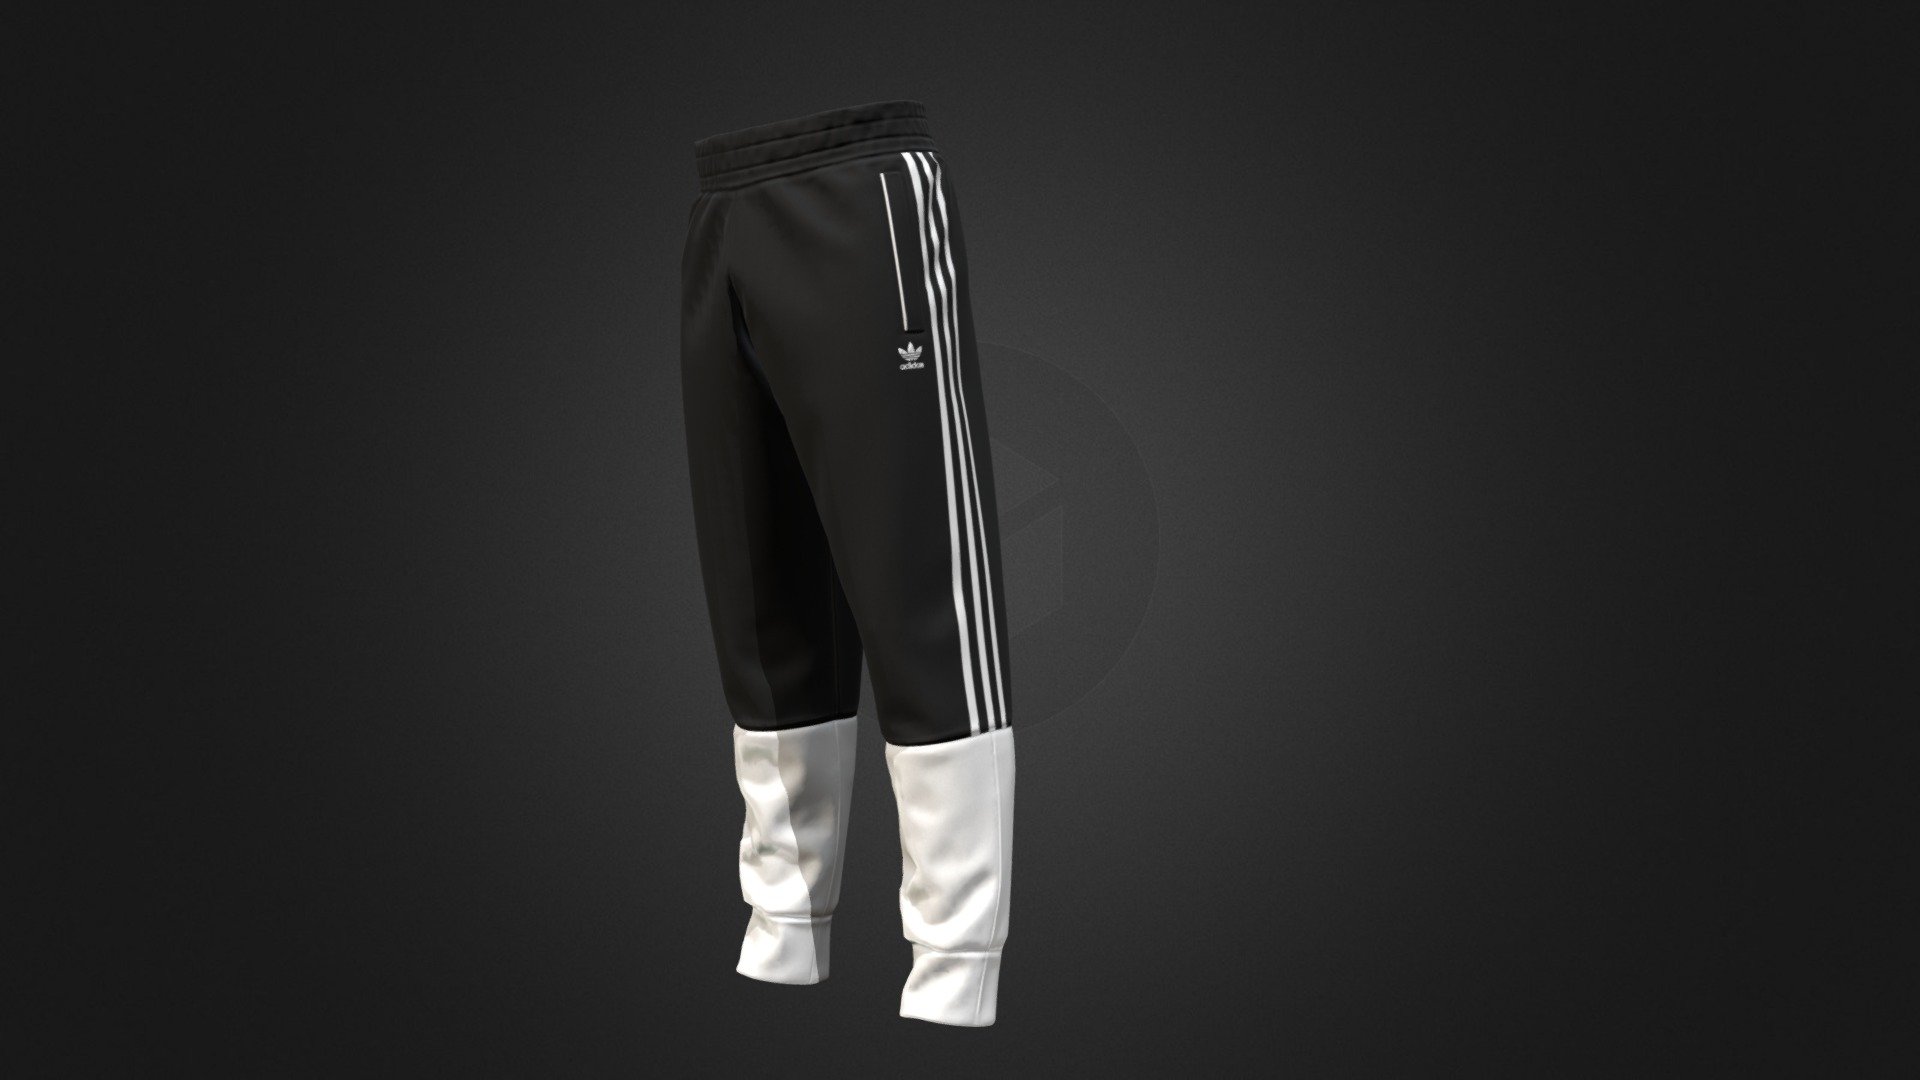 Game Ready ADIDAS Fleece Track Pants. 
Game Ready.
4K Textures. 
Substance Painter file for manupulating textures.
NO Animation. NO Rig.
Polycount: 9976 Tris - ADIDAS Fleece Track Pants - Buy Royalty Free 3D model by nirmitgarg 3d model